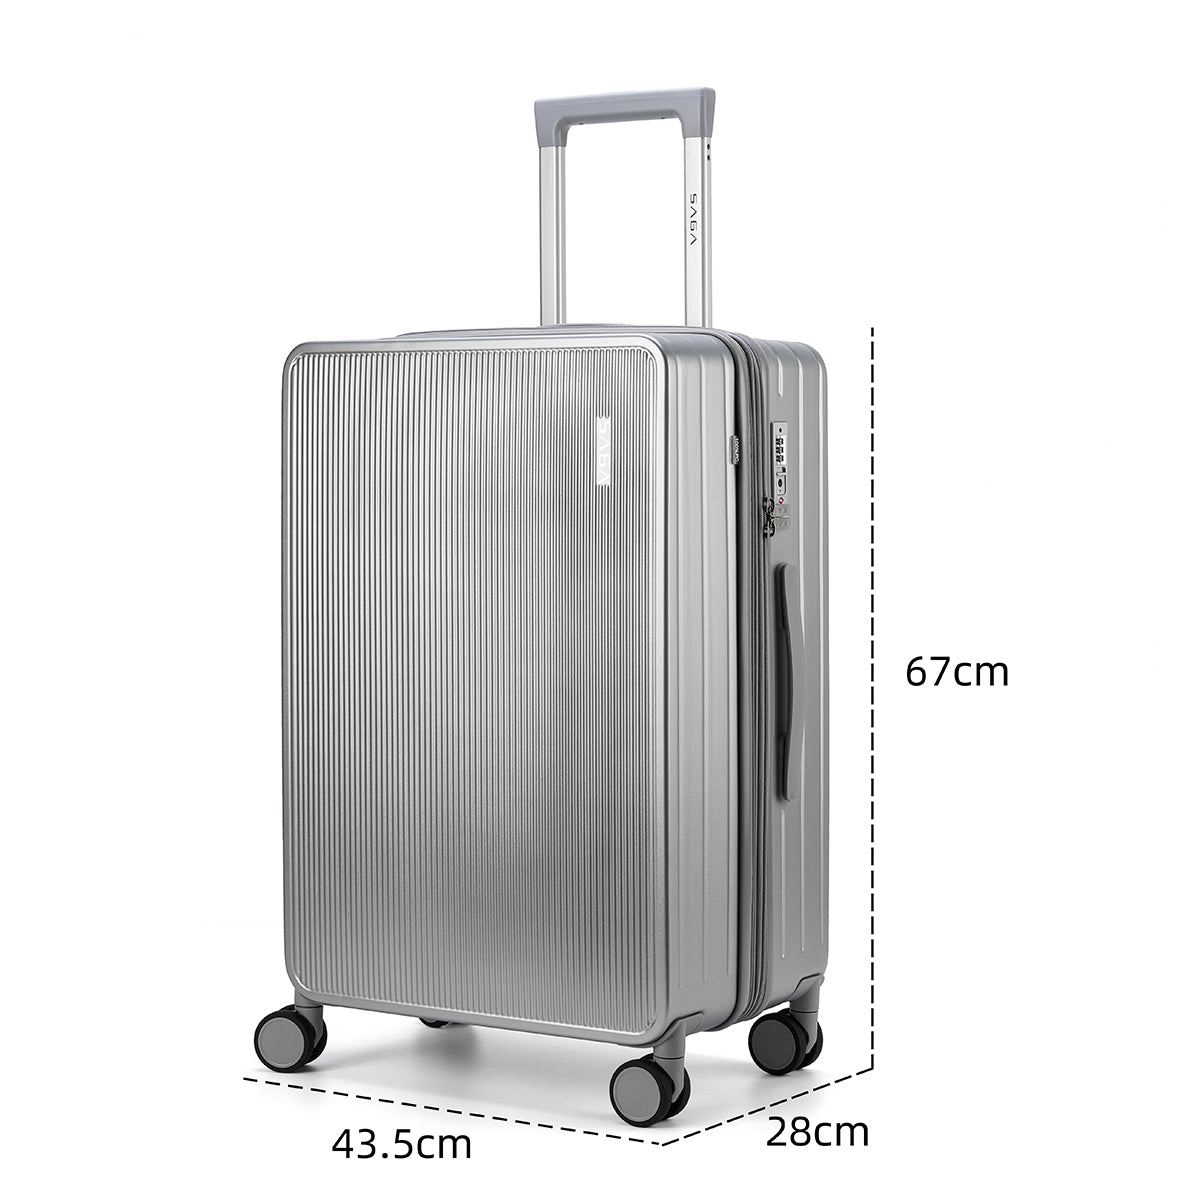 Luxurious polycarbonate travel bags, silver color, different sizes